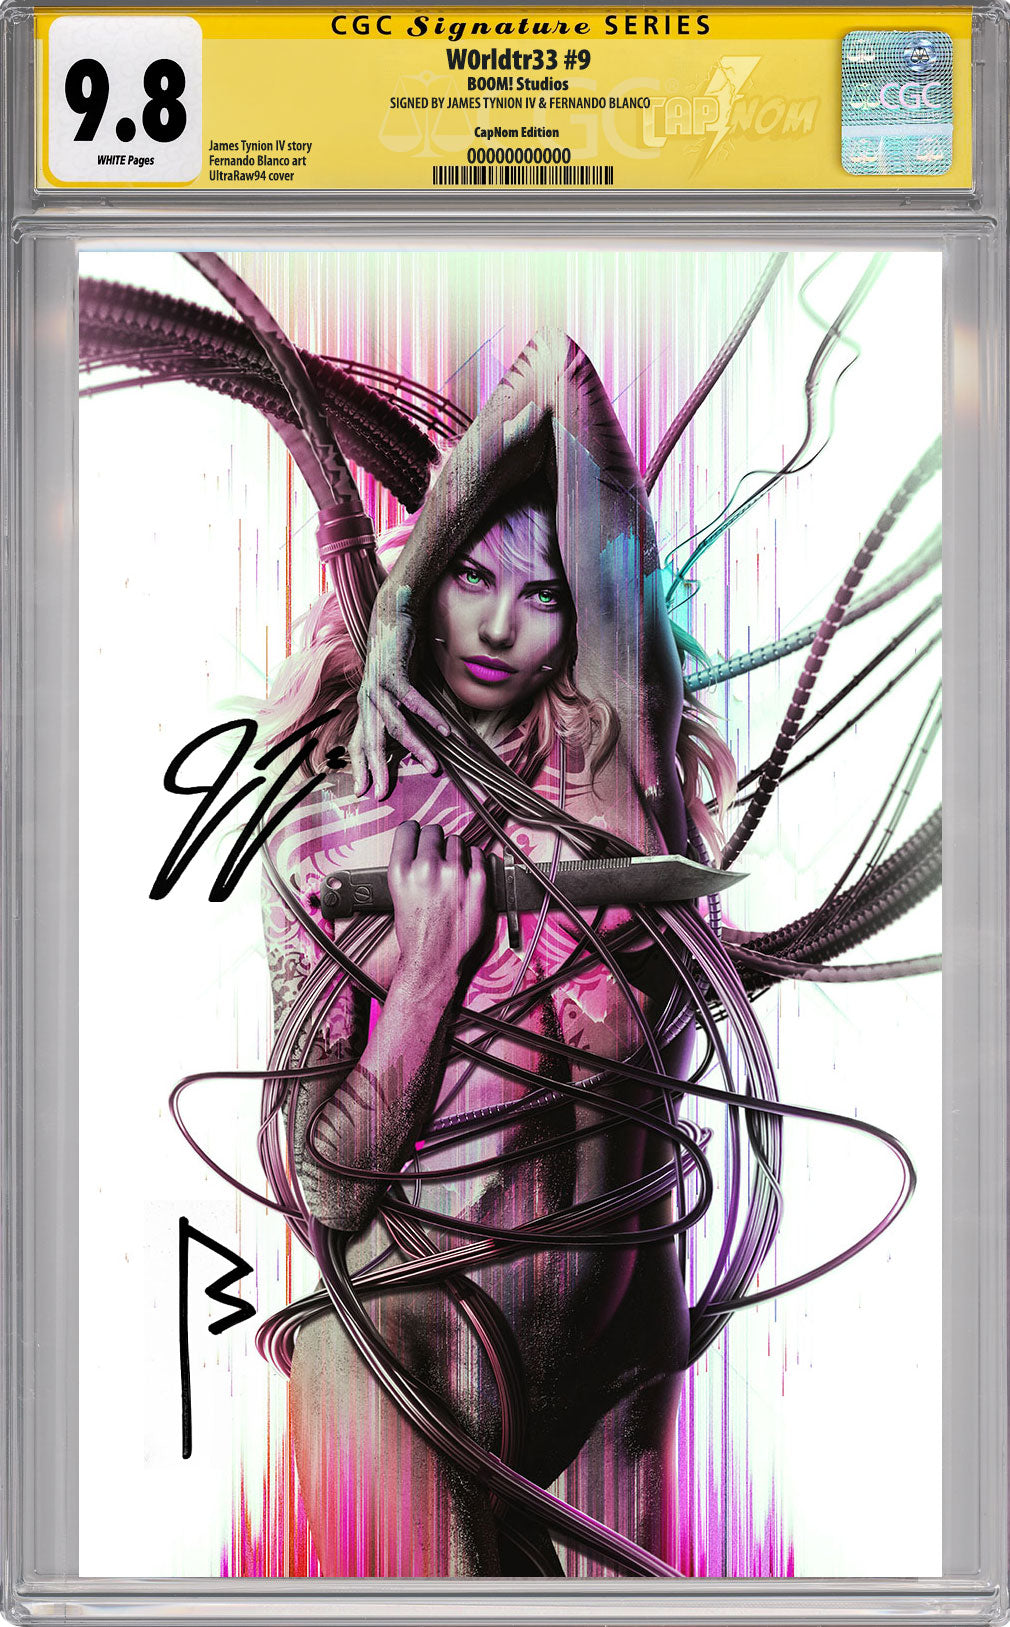 W0RLDTR33 #9 C2E2 Exclusive Virgin Cover "GLITCH" CGC SS 9.8 SIGNED BY TYNION & BLANCO